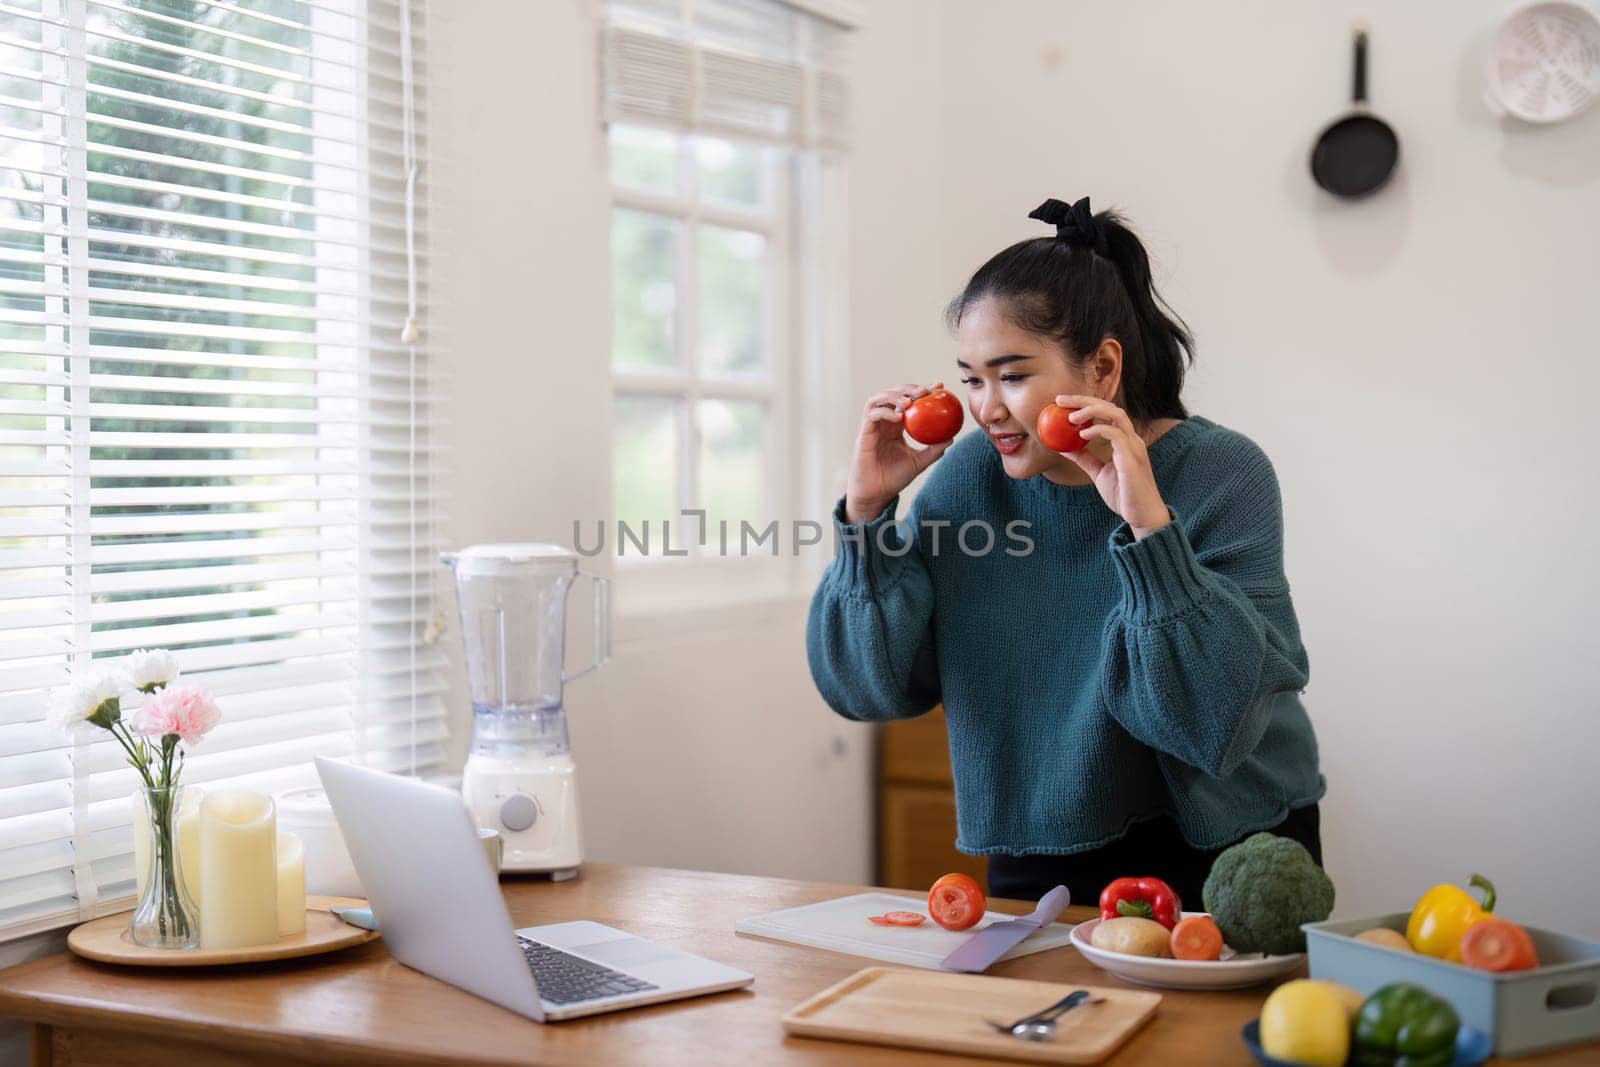 Young woman in kitchen preparing vegetables while video chatting. Concept of healthy cooking and online communication by nateemee